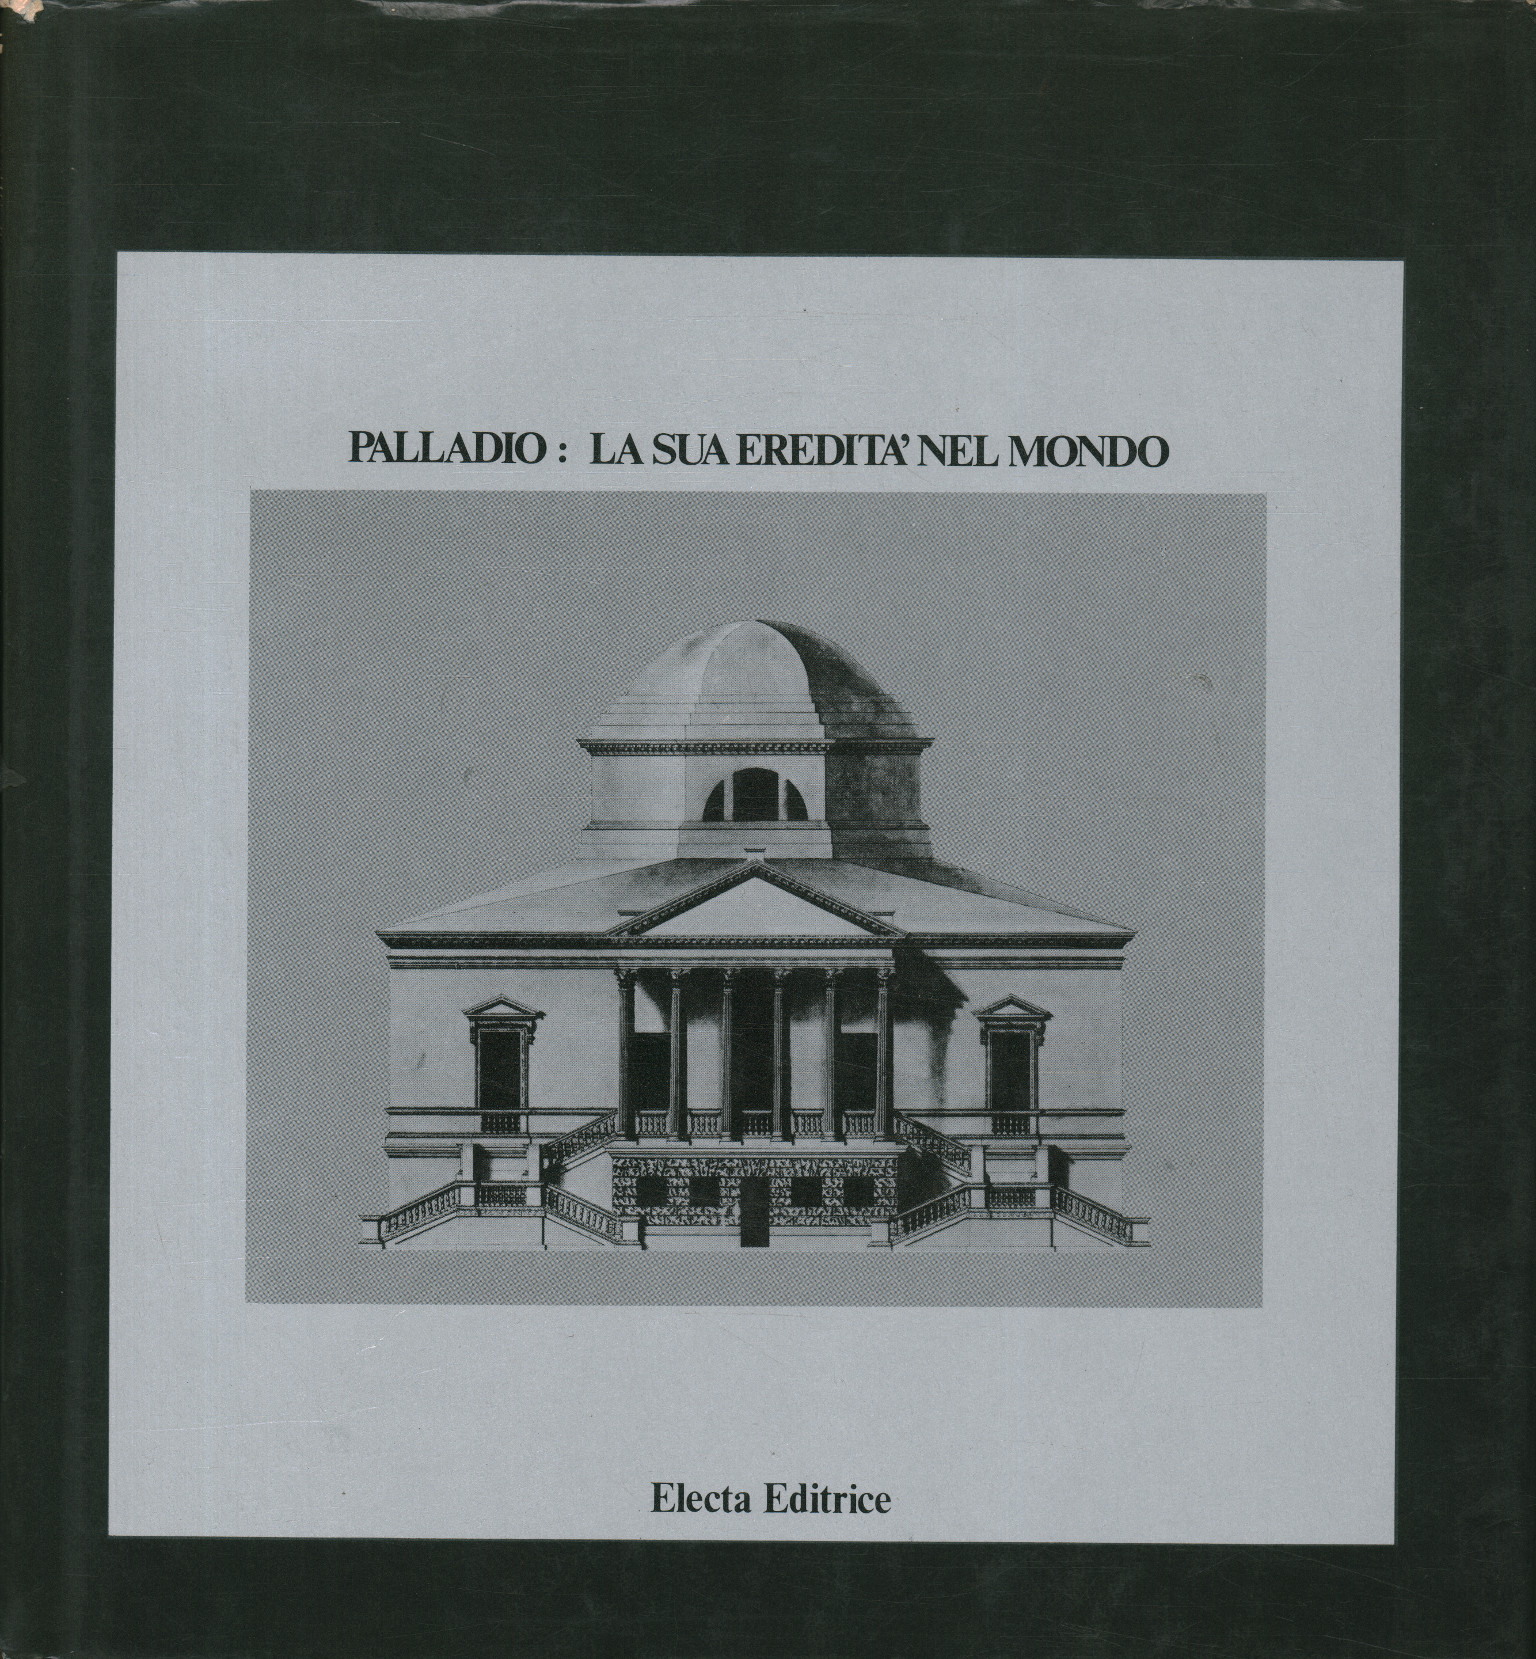 Palladio: his heritage in the world